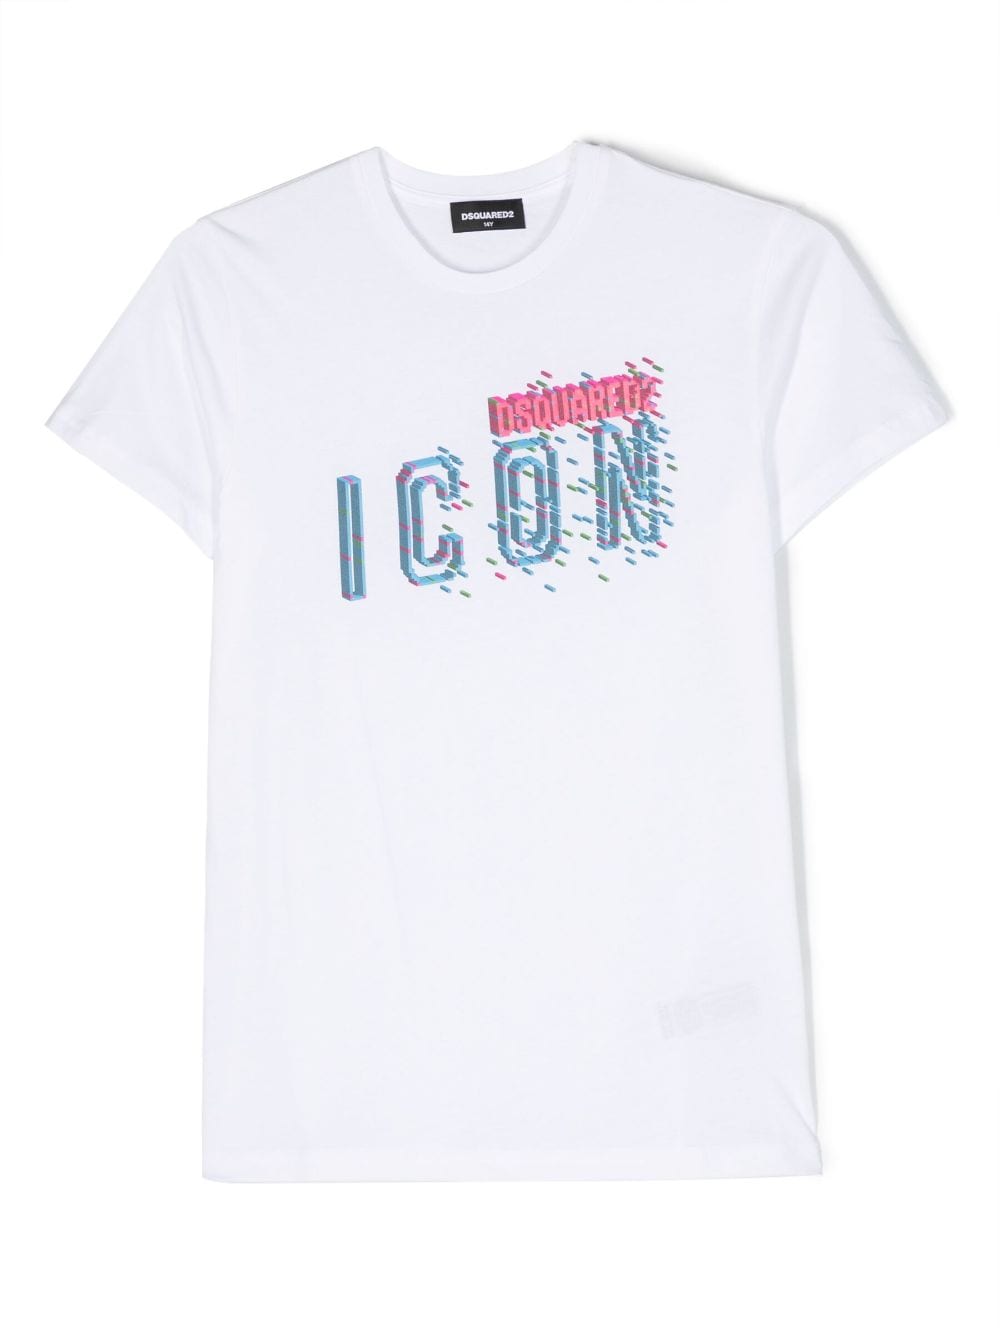 White t-shirt for boys with ICON print